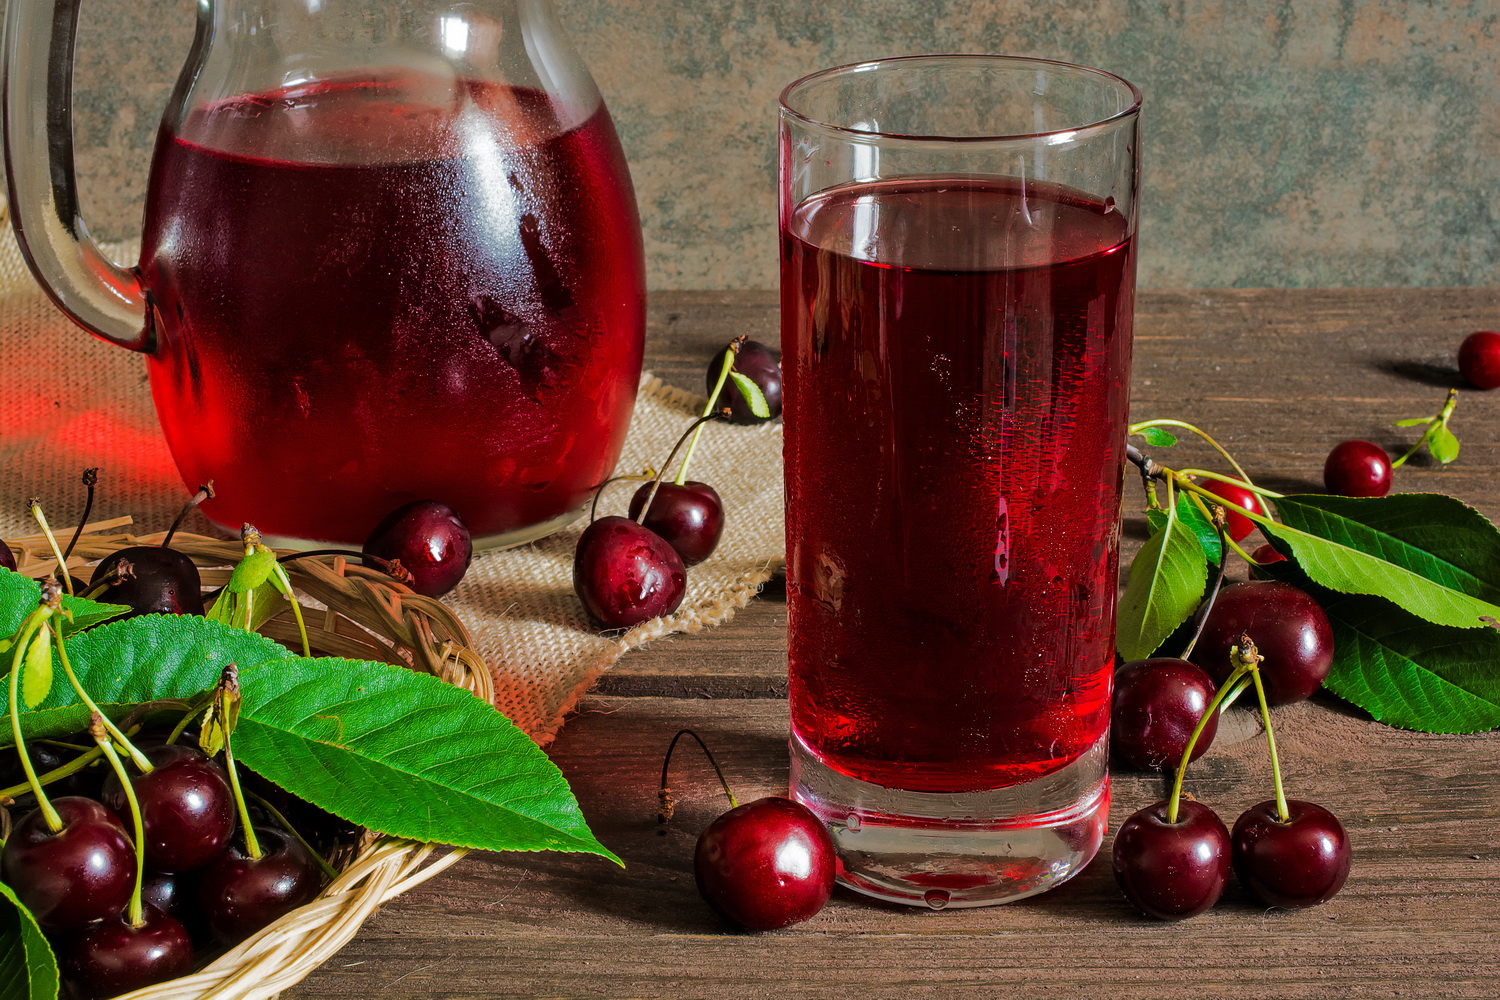 Sour Cherry Juice from Iran for export,www.livco.eu